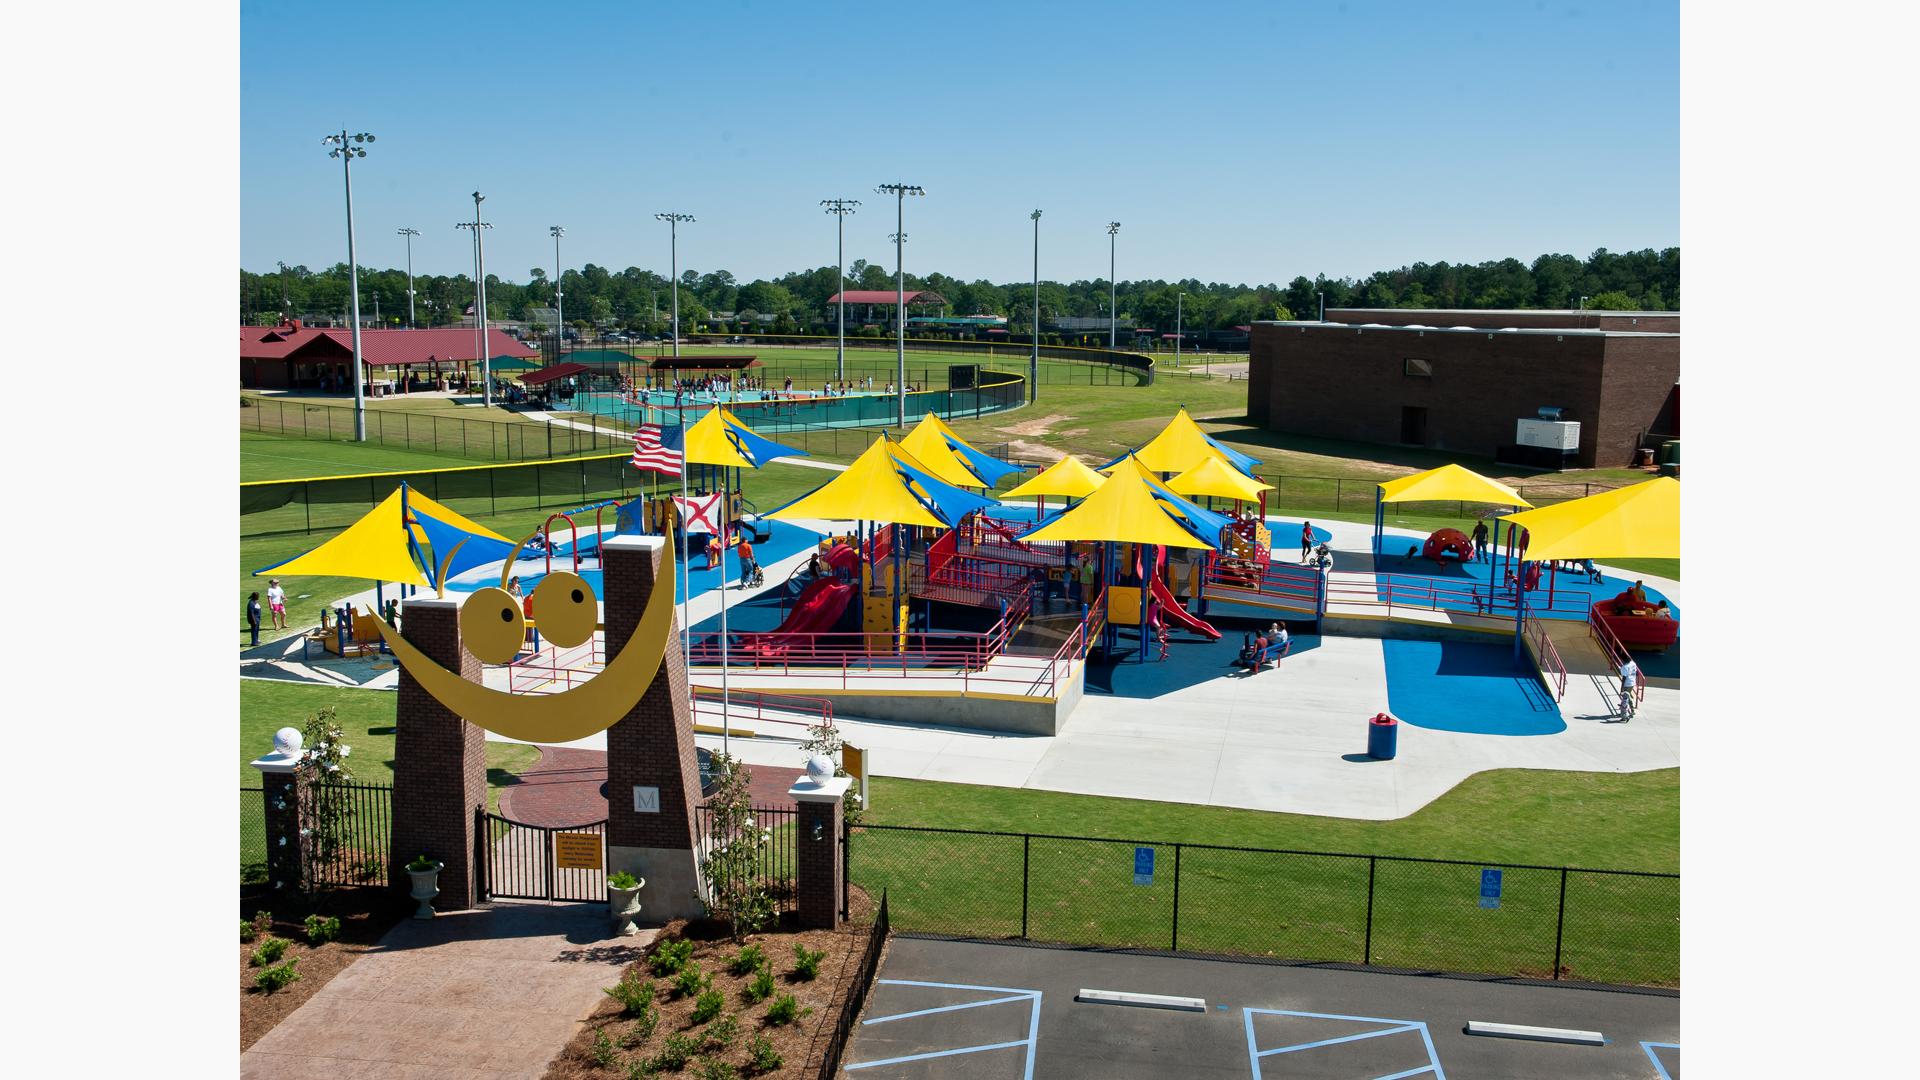 All inclusive playground covered in CoolToppers shade system with Baseball fields in background. Smiling gateway in foreground.